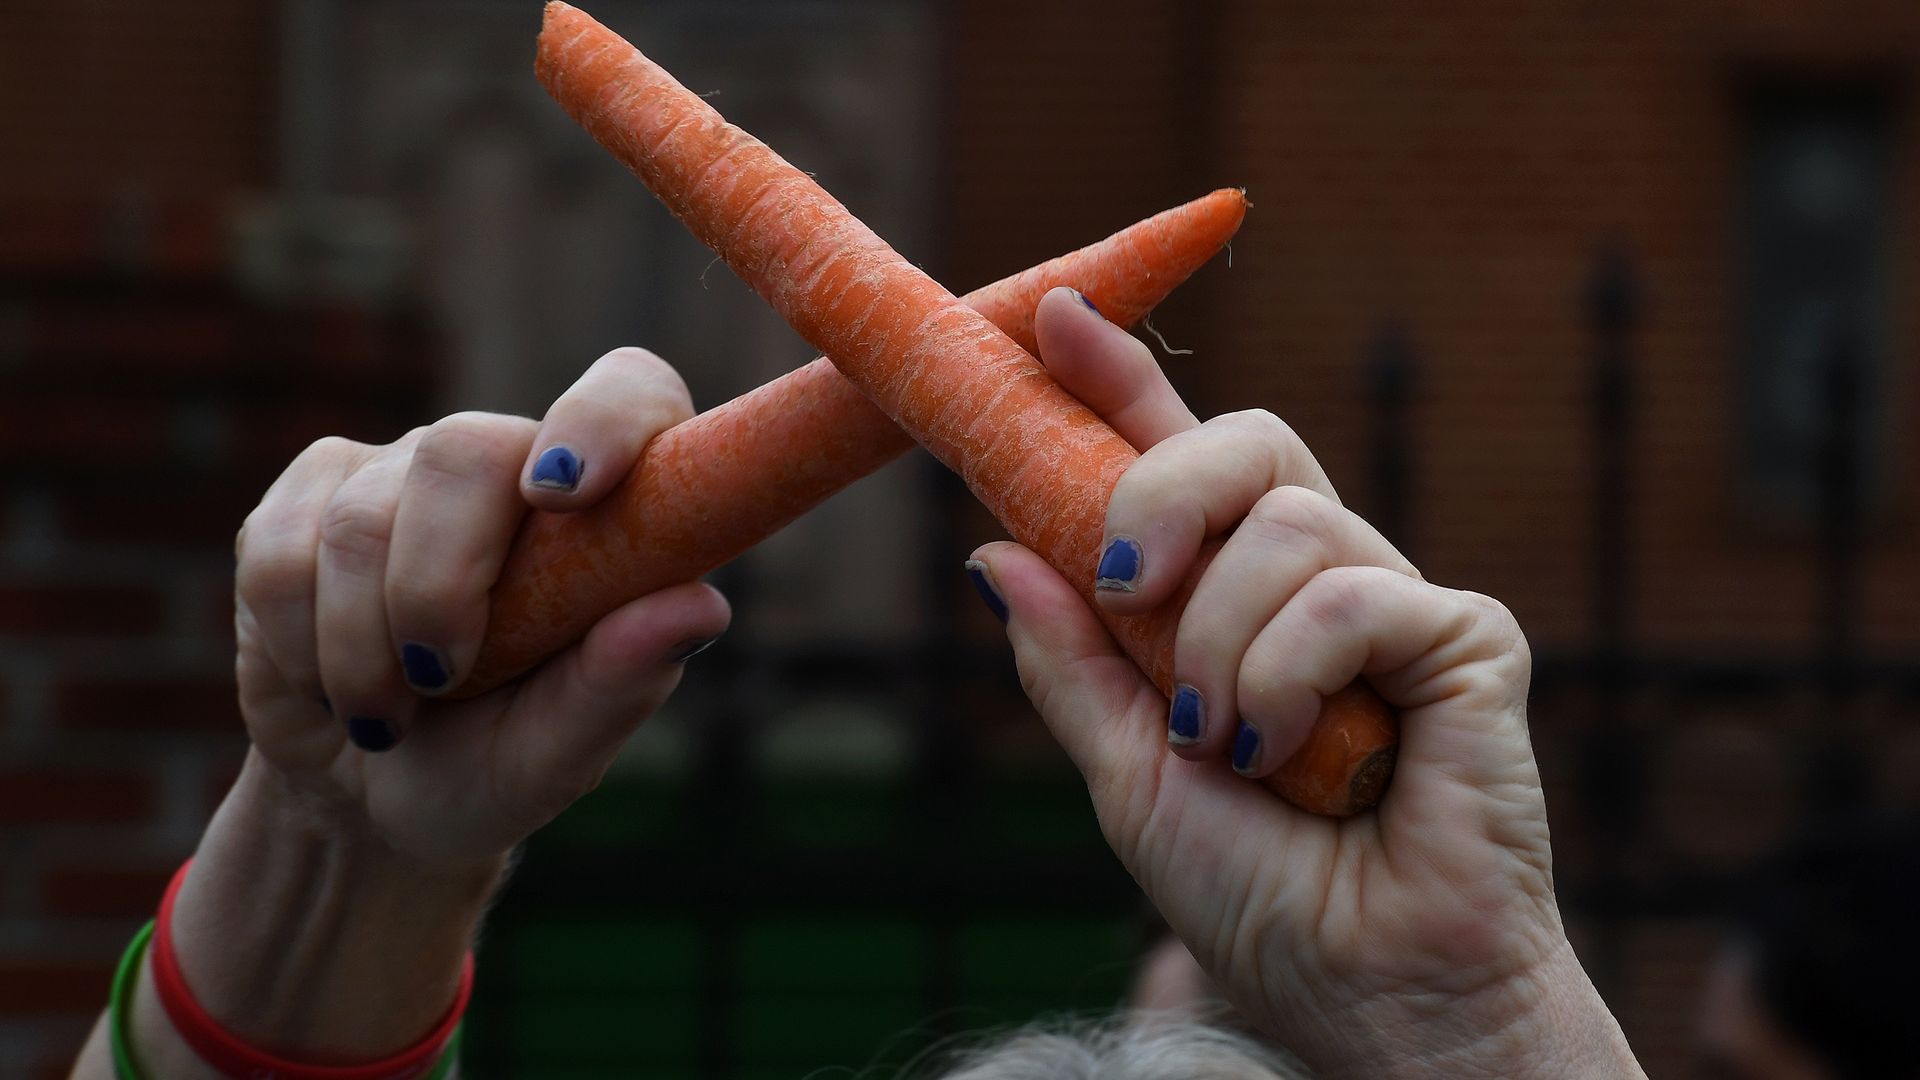 A close-up photo of two carrot sticks used by a protestor to demonstrate against lack of food options in D.C.'s poorest ward